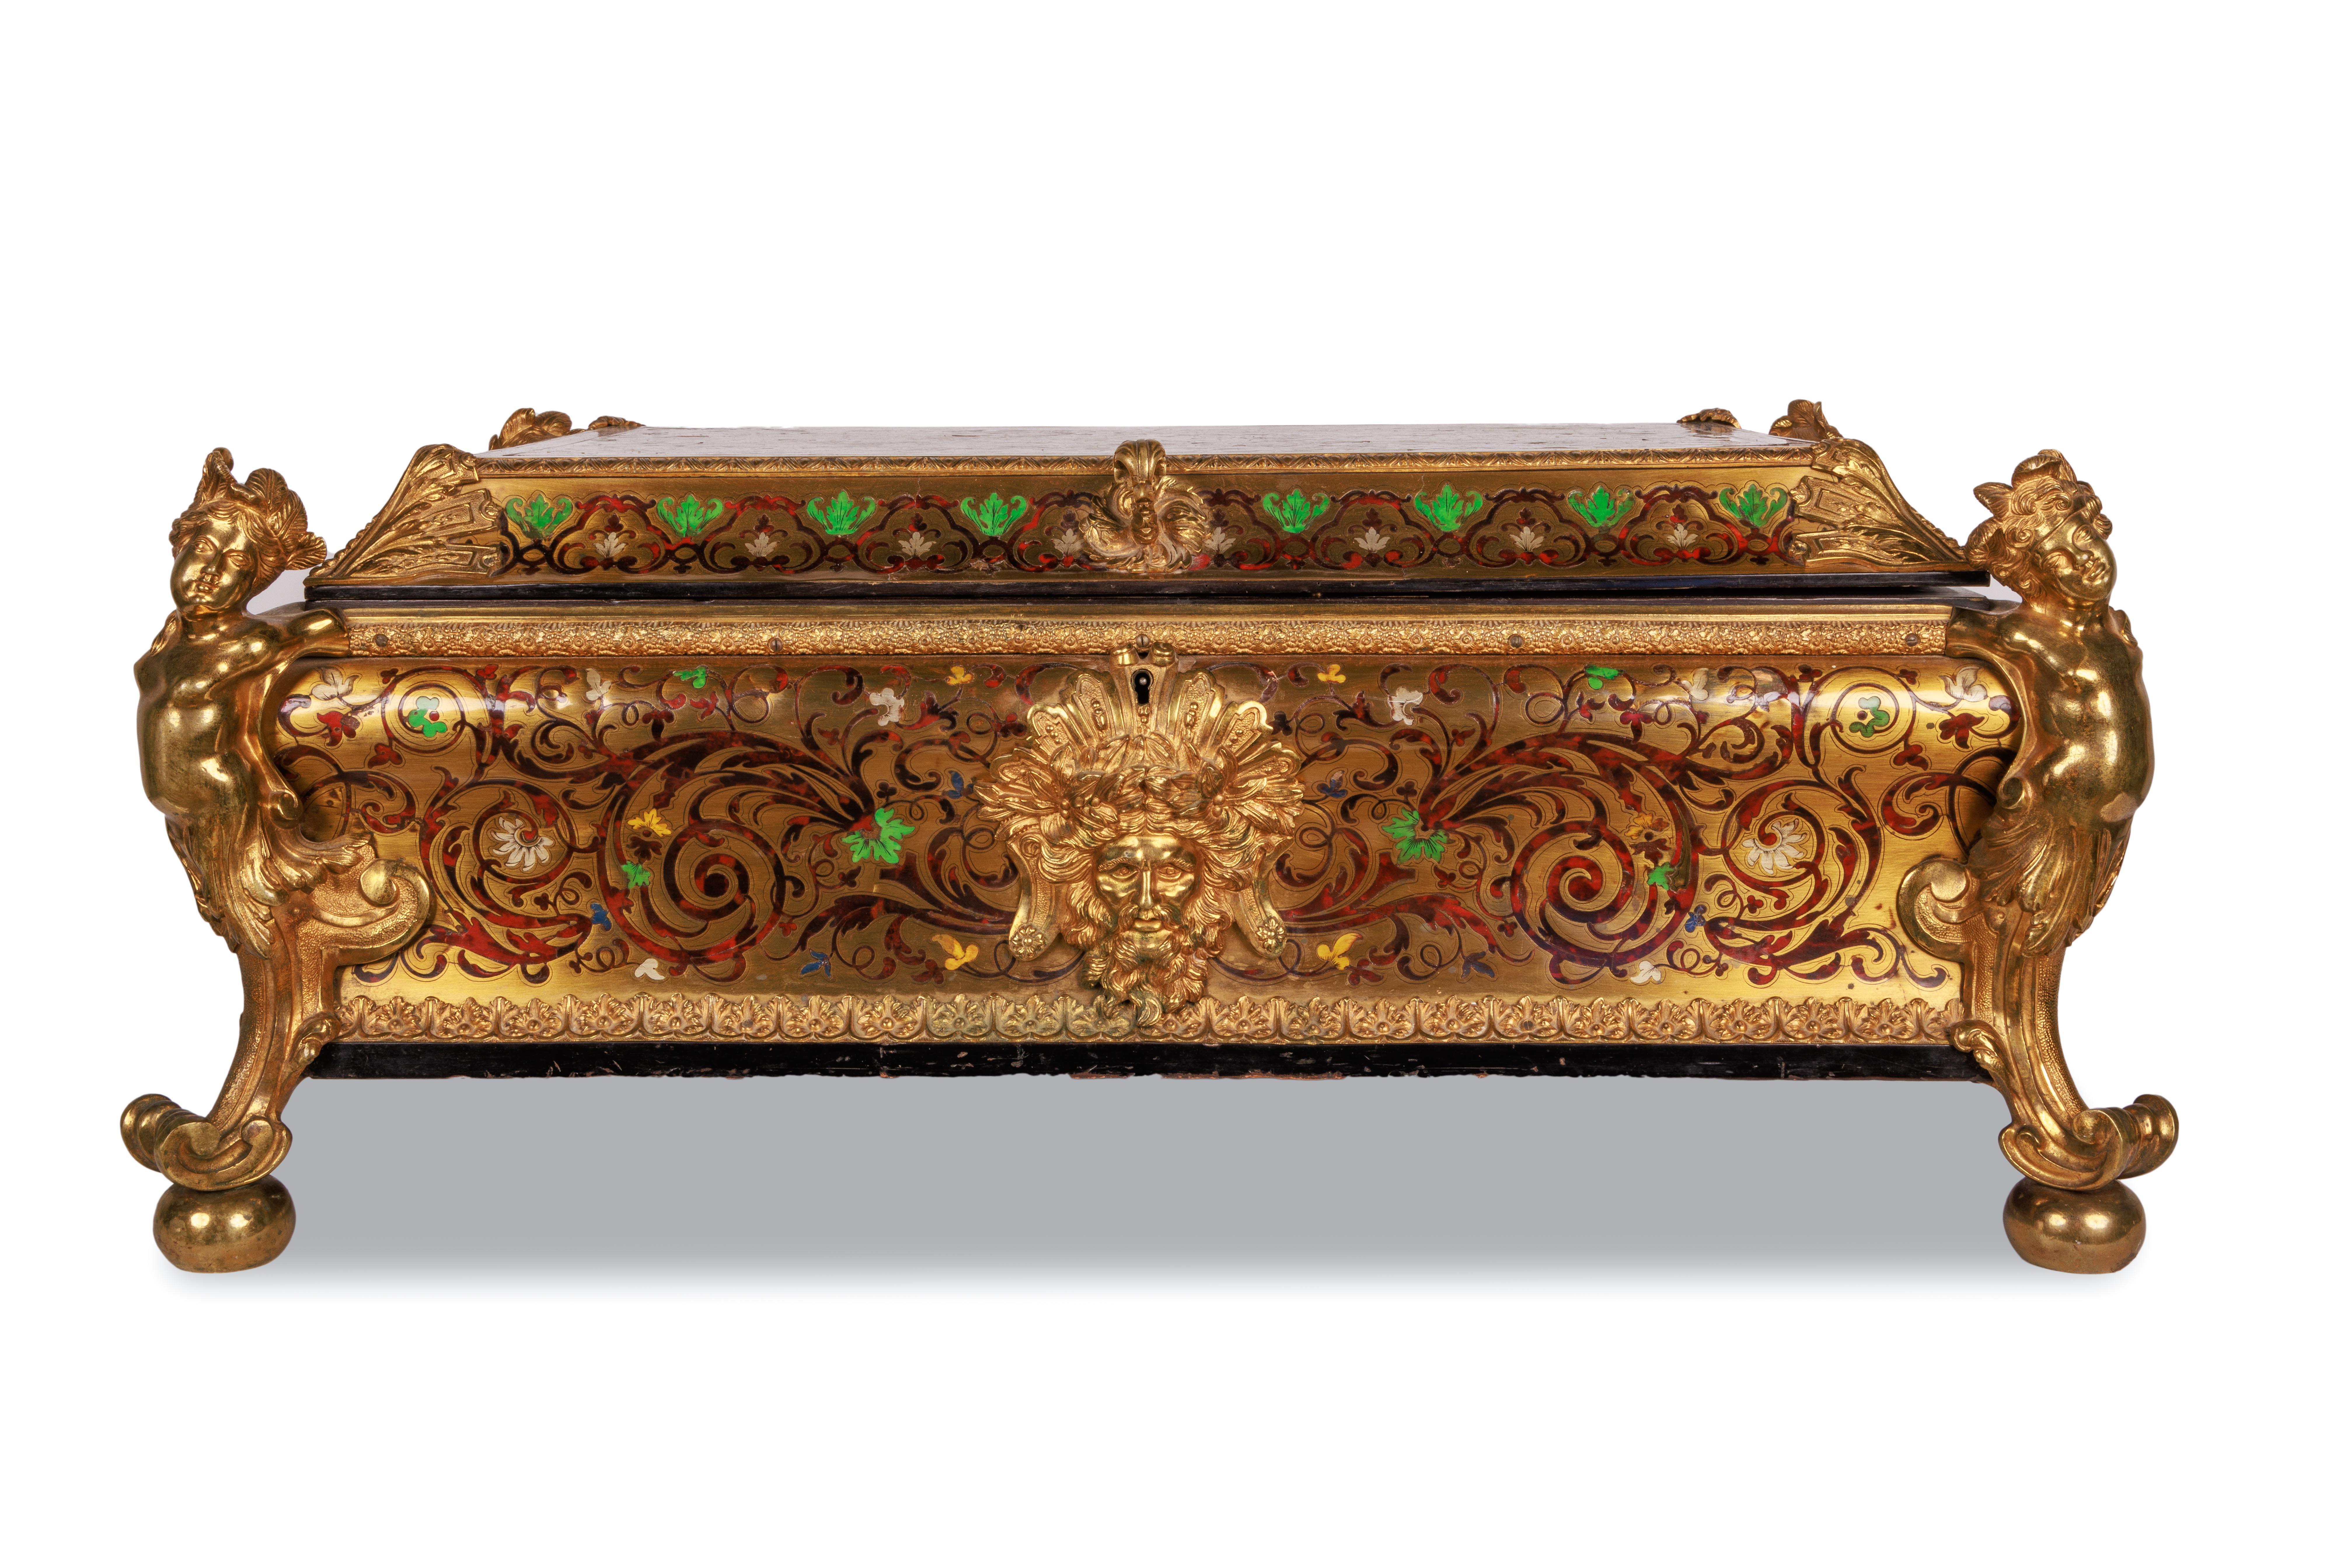 Monumental Louis XIV Style Gilt-Bronze Mounted Boulle Marquetry Casket Box For Sale 7